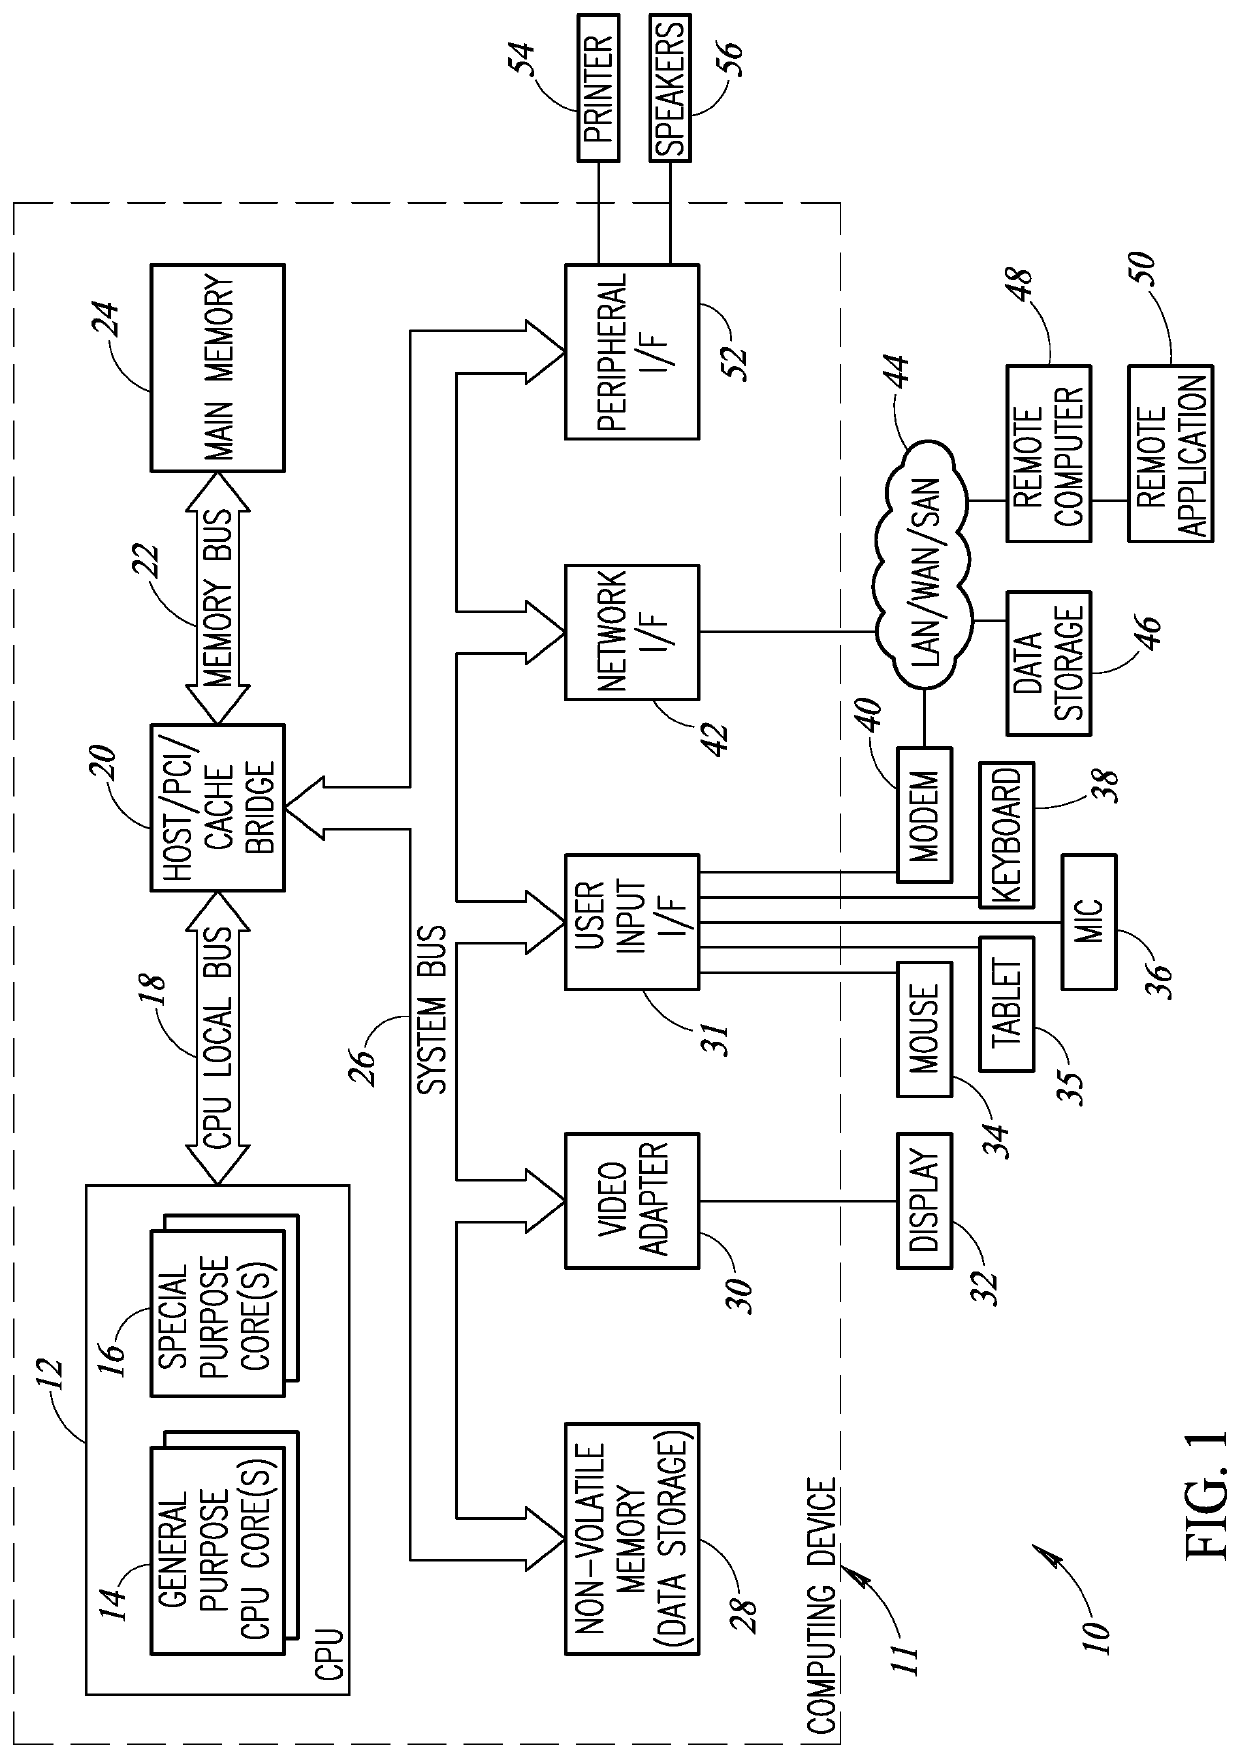 Layer control unit instruction addressing safety mechanism in an artificial neural network processor